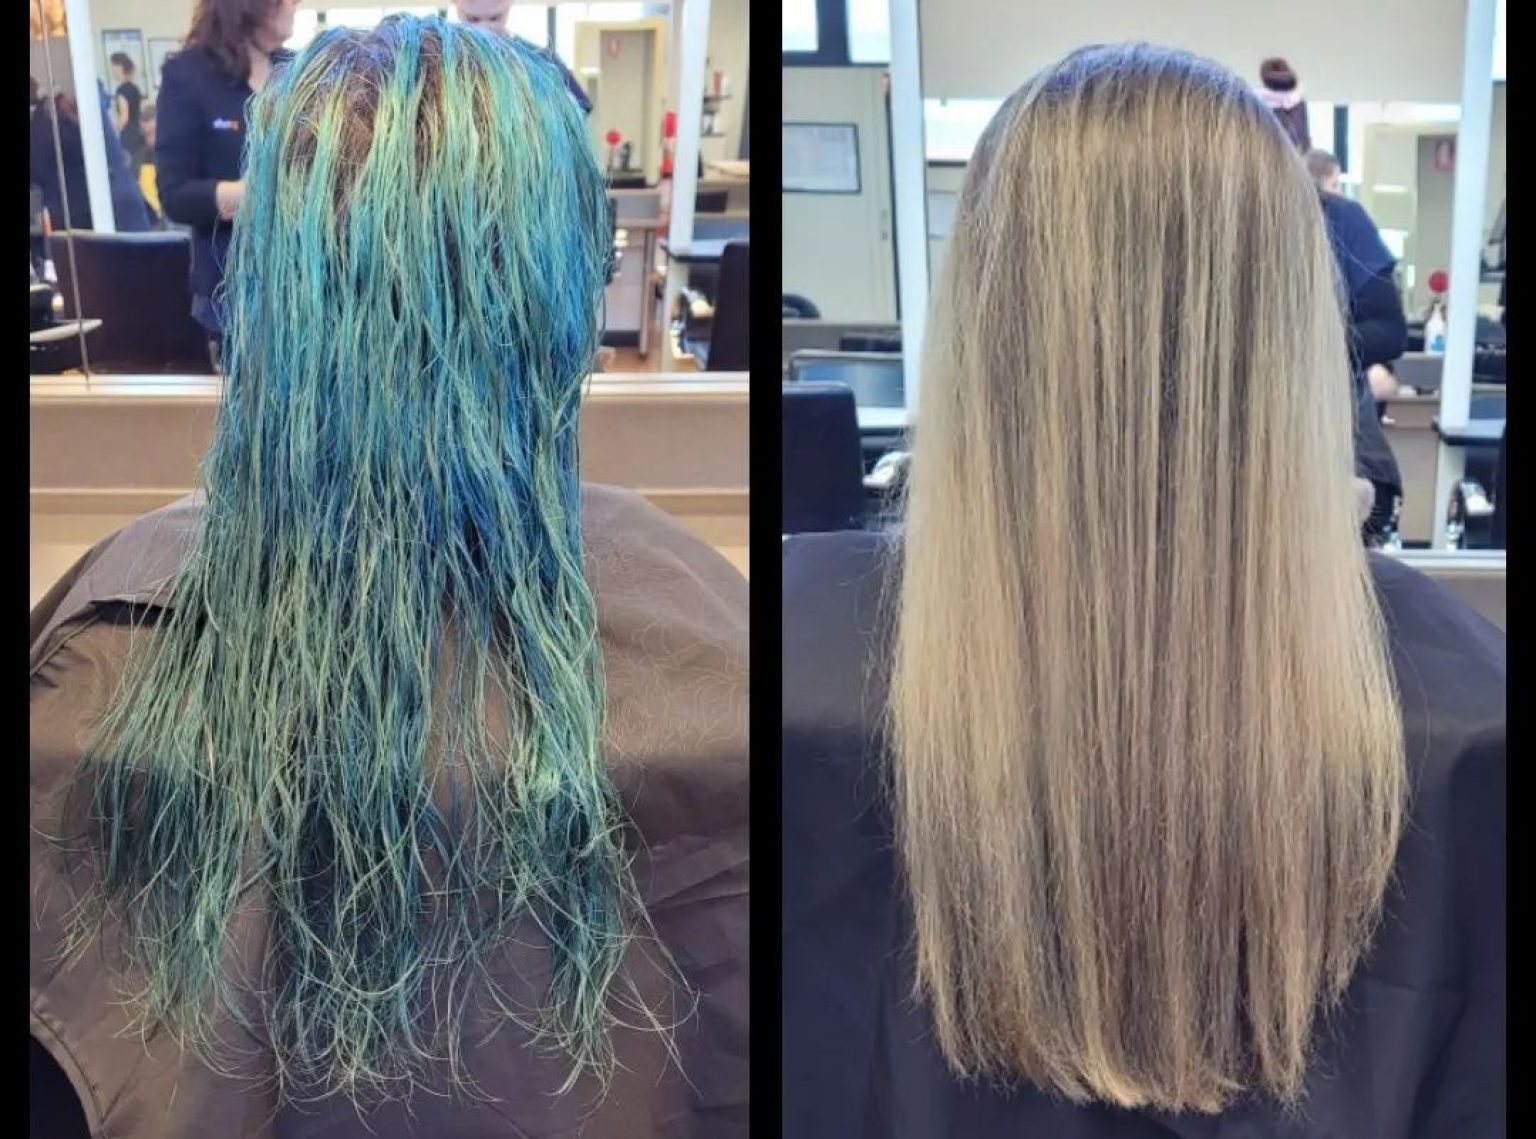 2. 5 Ways to Remove Blue Hair Dye - wide 1